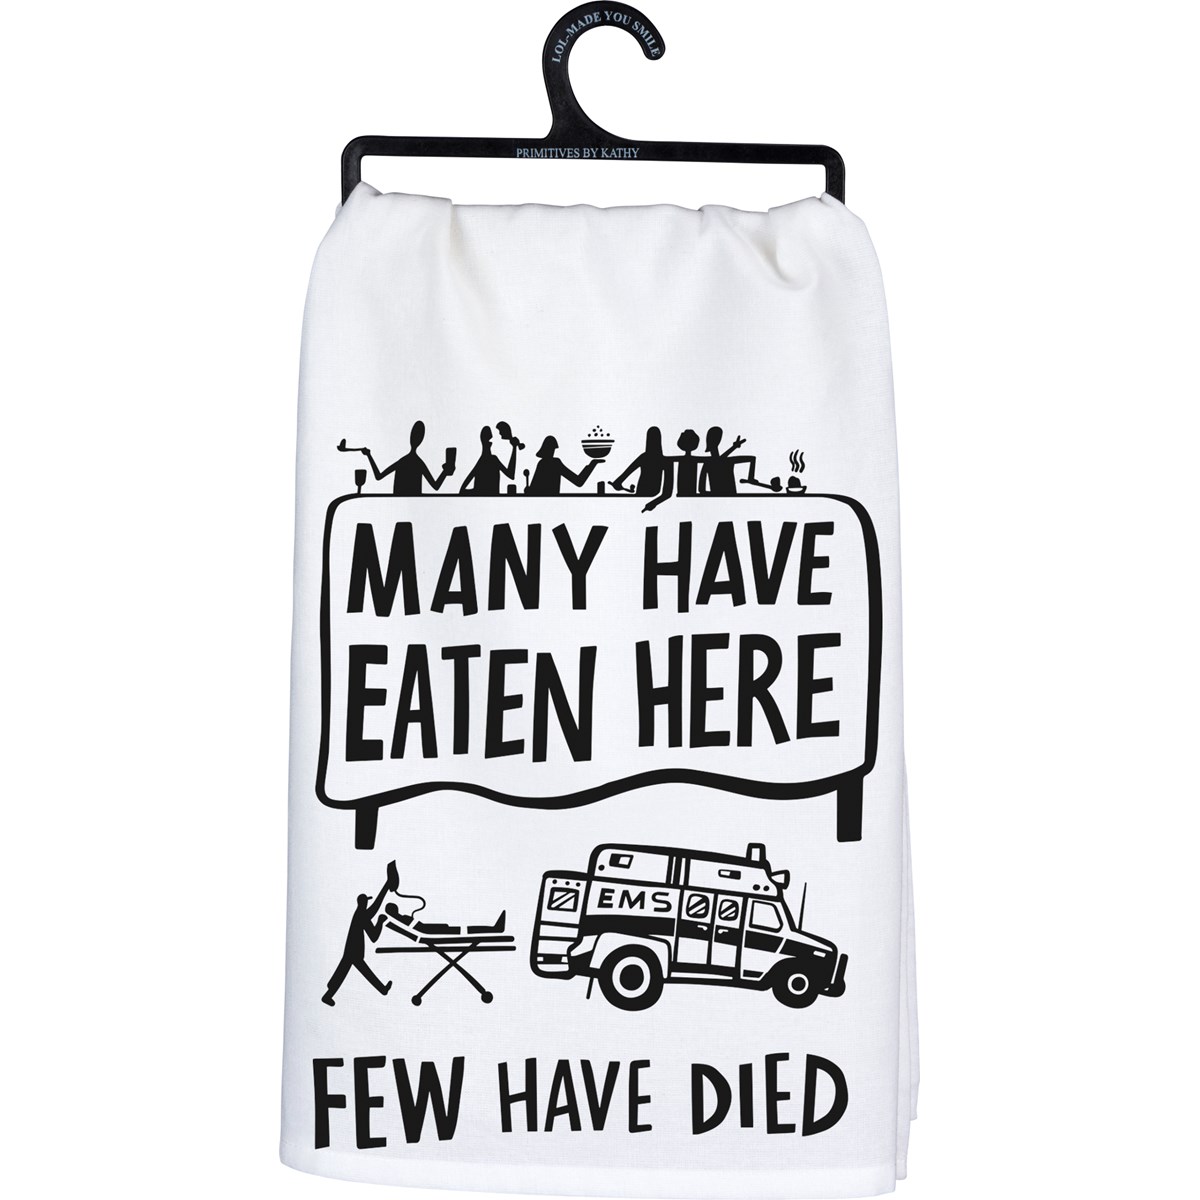 Kitchen Towel - Many Have Eaten Here Few Have Died - 28" x 28" - Cotton